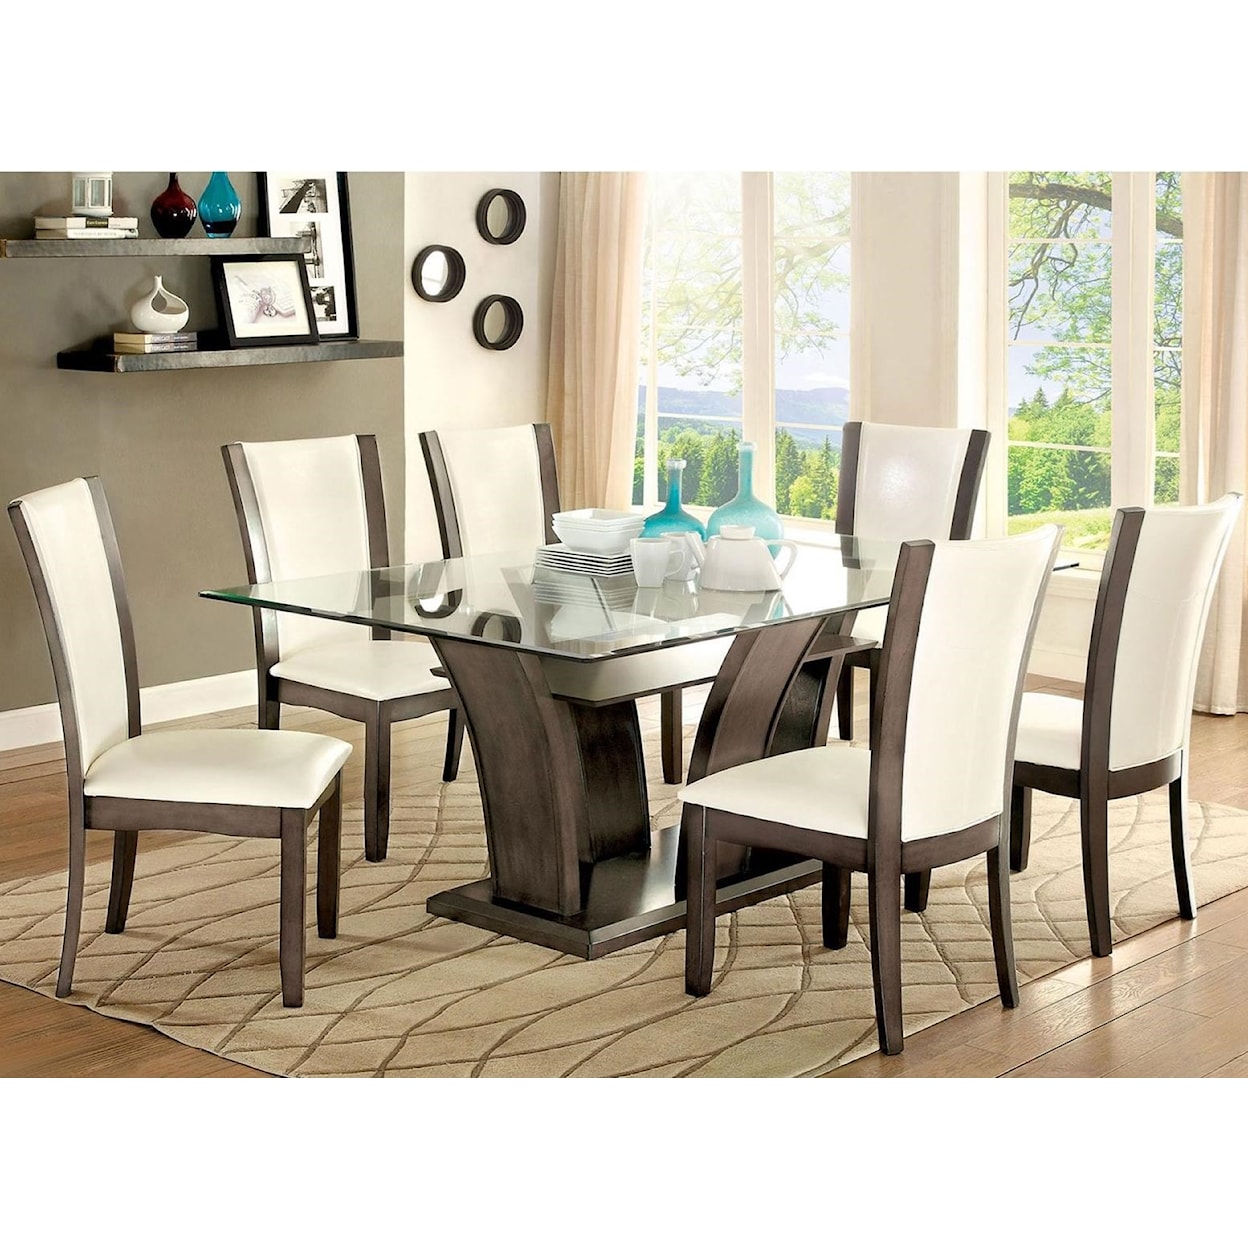 FUSA Manhattan I & II Table and 6 Side Chairs